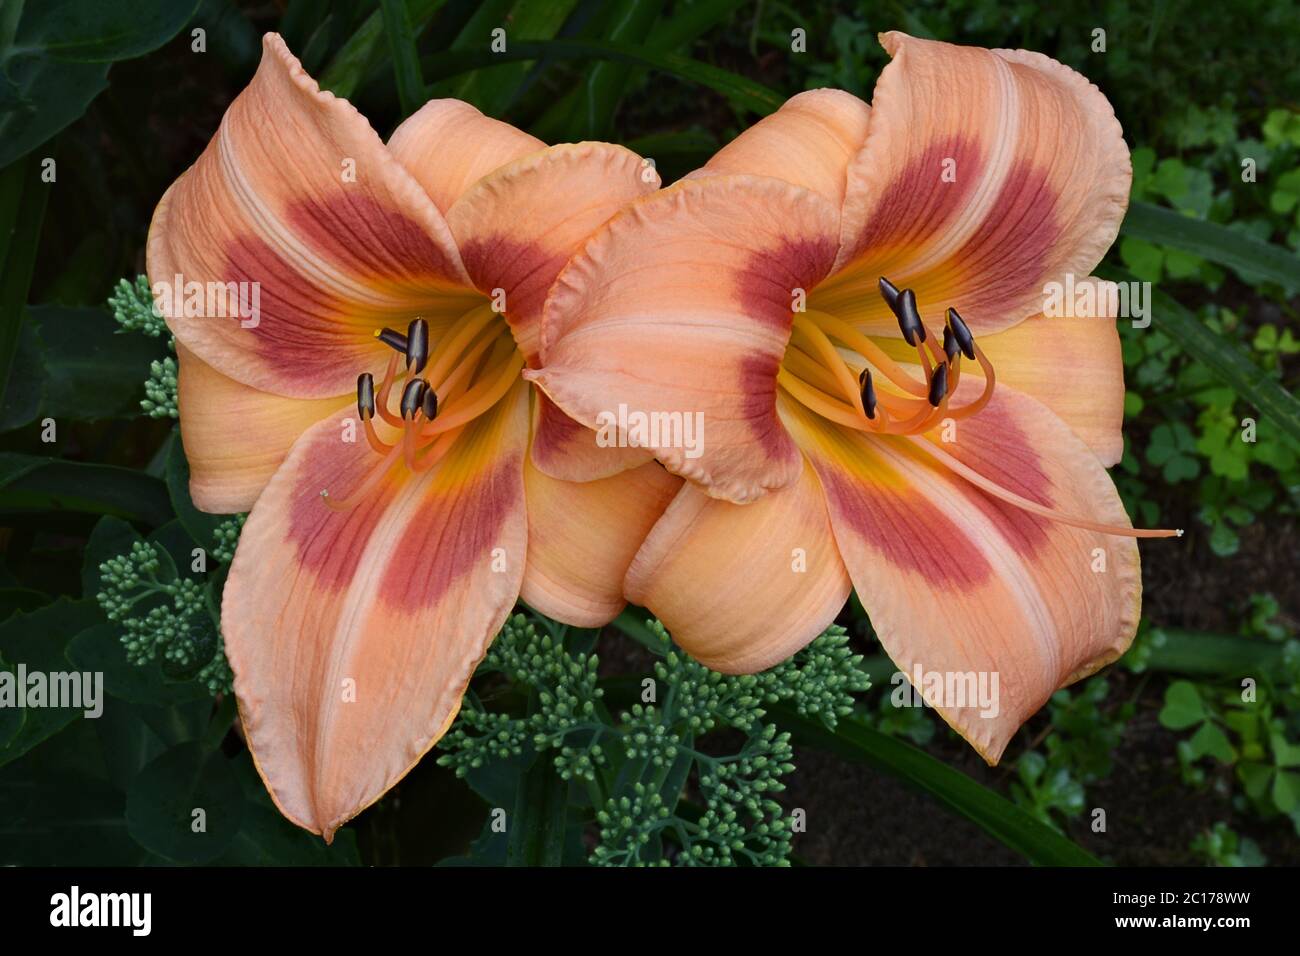 Closeup of two vibrant peach and rose colored daylily blossoms (Hemerocallis Real Wind). Reproductive parts ((pistol and stamens) extend from center. Stock Photo